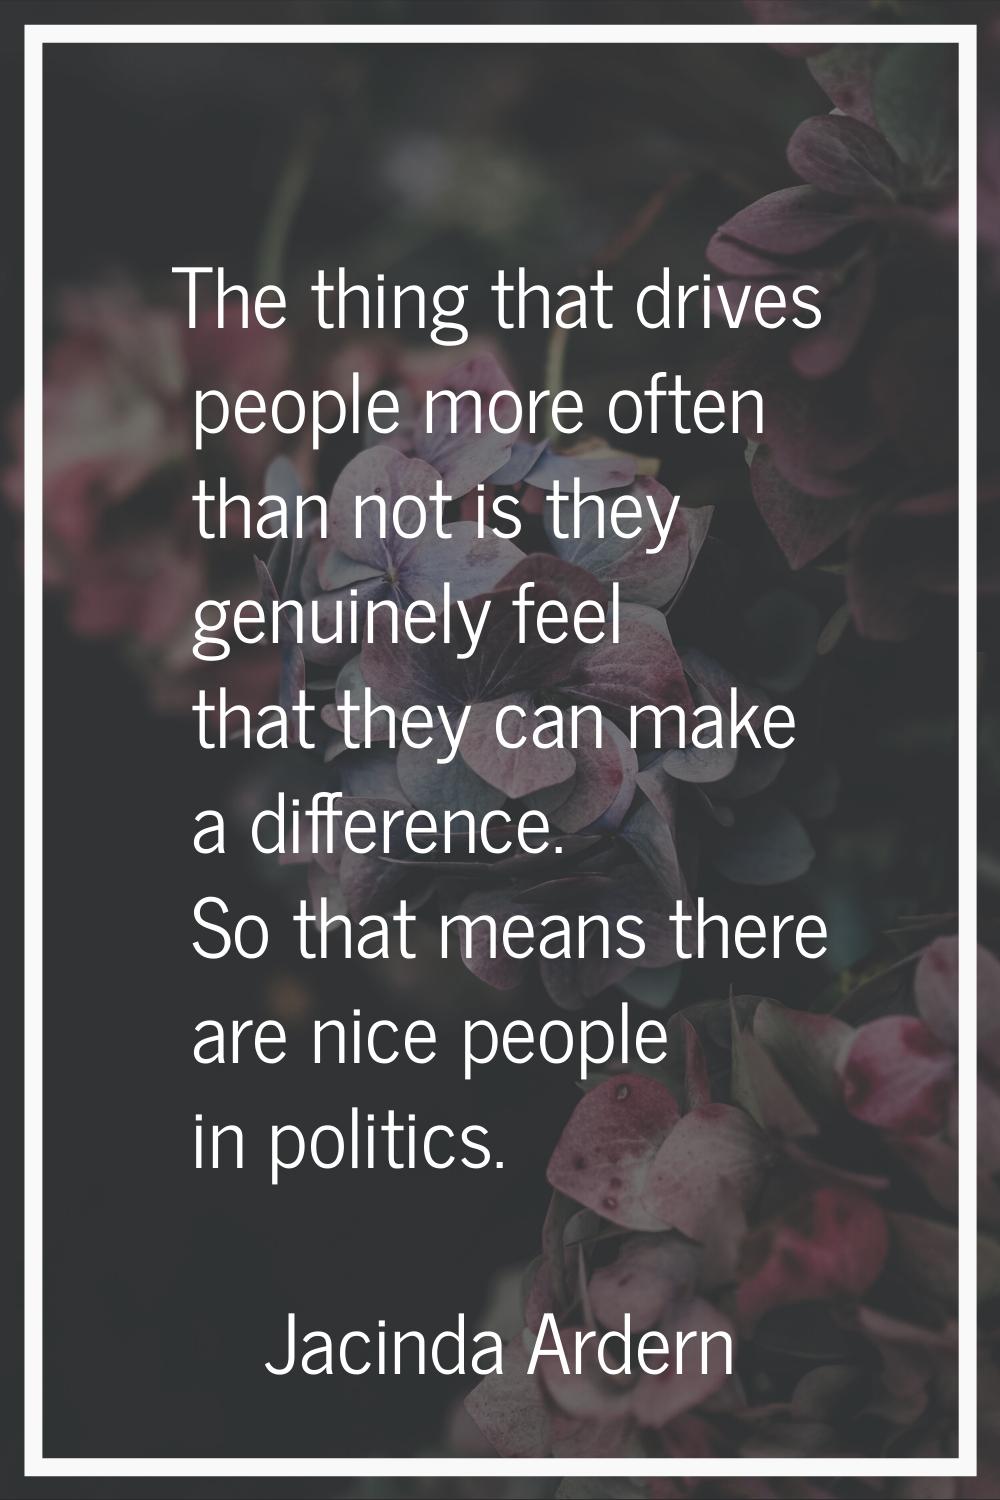 The thing that drives people more often than not is they genuinely feel that they can make a differ